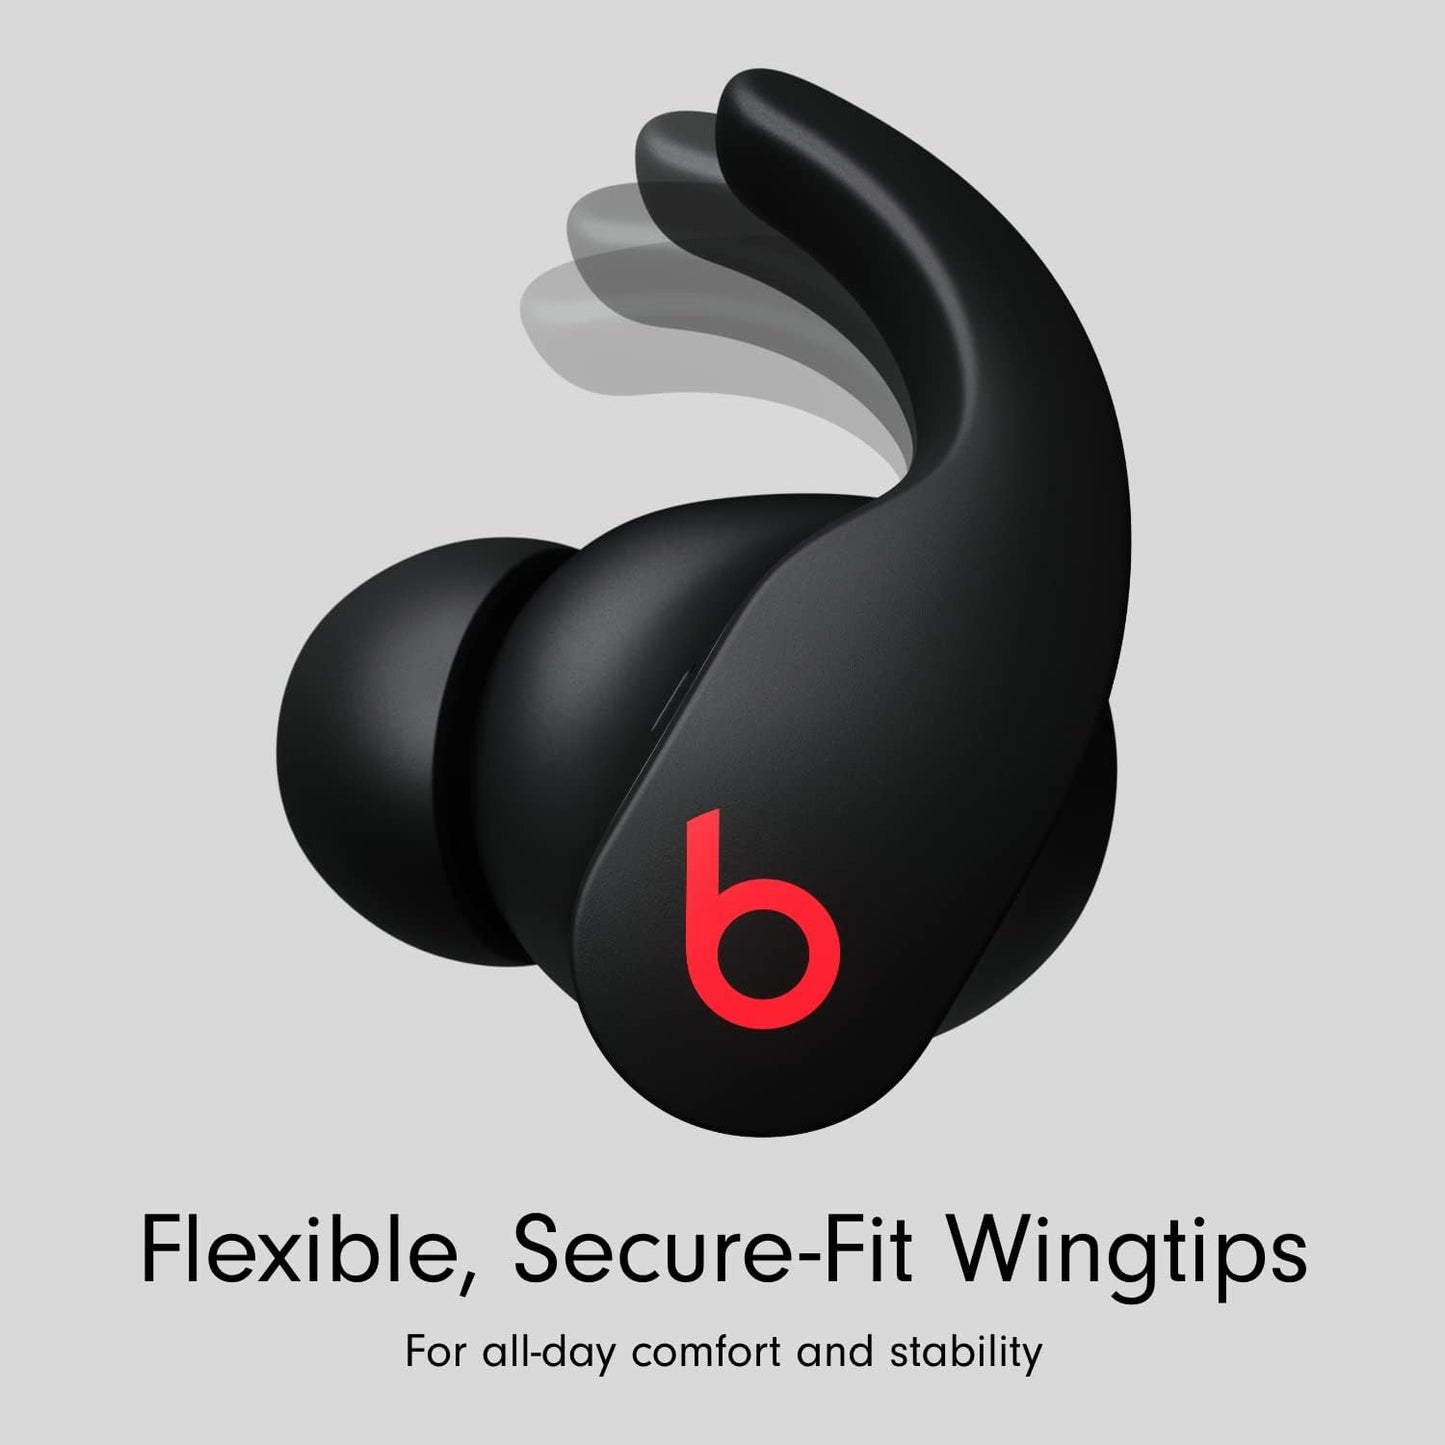 Beats Fit Pro - True Wireless Noise Cancelling Earbuds • Apple H1 Headphone Chip • Compatible with Apple & Android • Class 1 Bluetooth • Built-in Microphone • 6 Hours of Listening Time • Beats Black